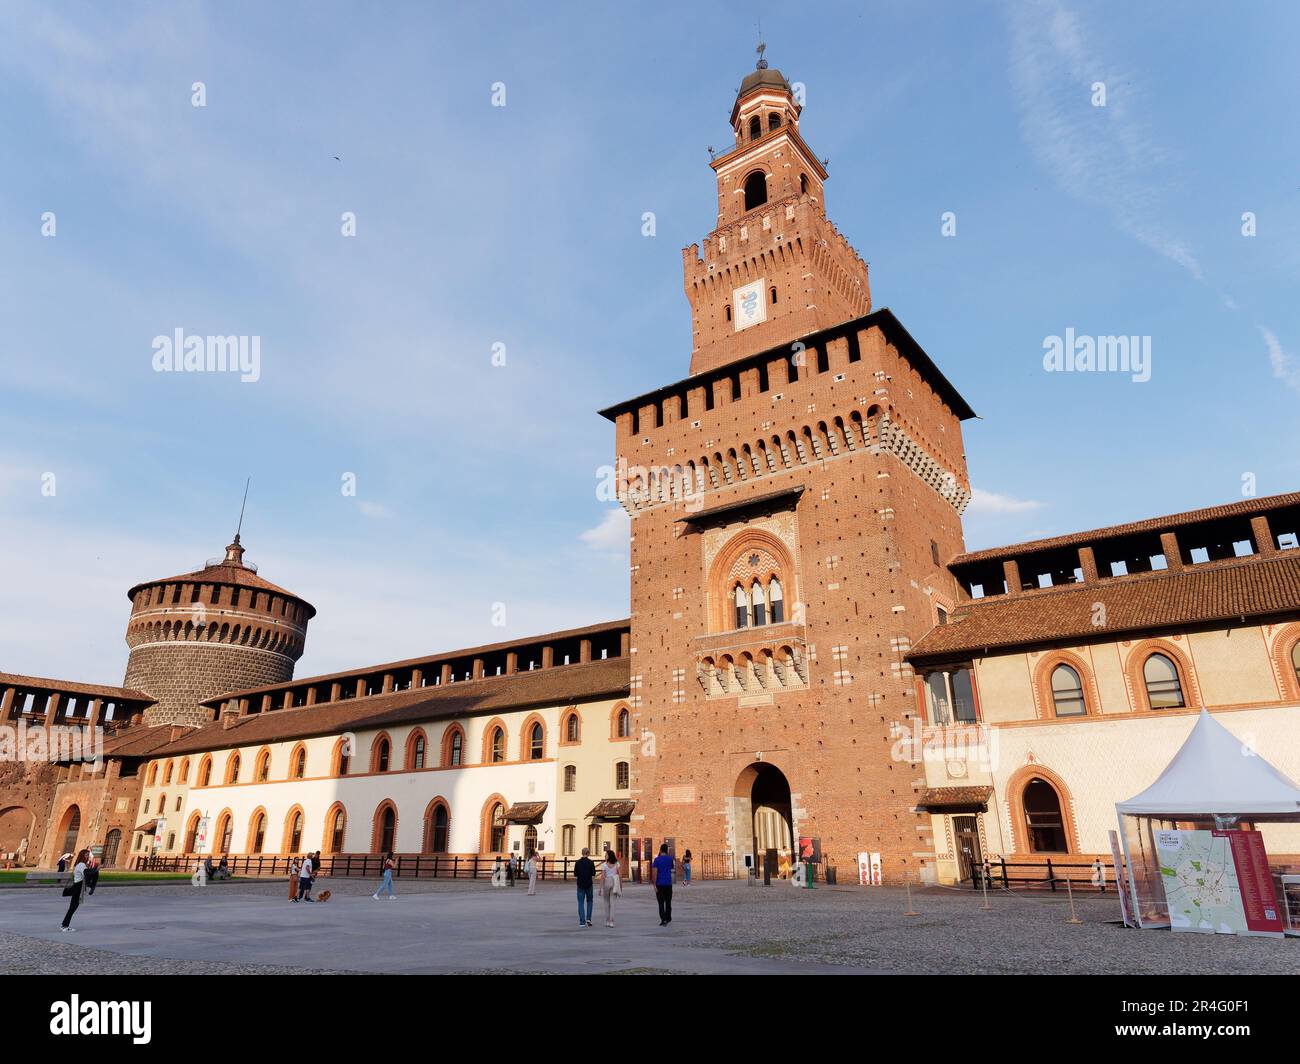 Sforzesco Castle and courtyard with tourists sightseeing in the City of Milan, Lombardy, Italy Stock Photo